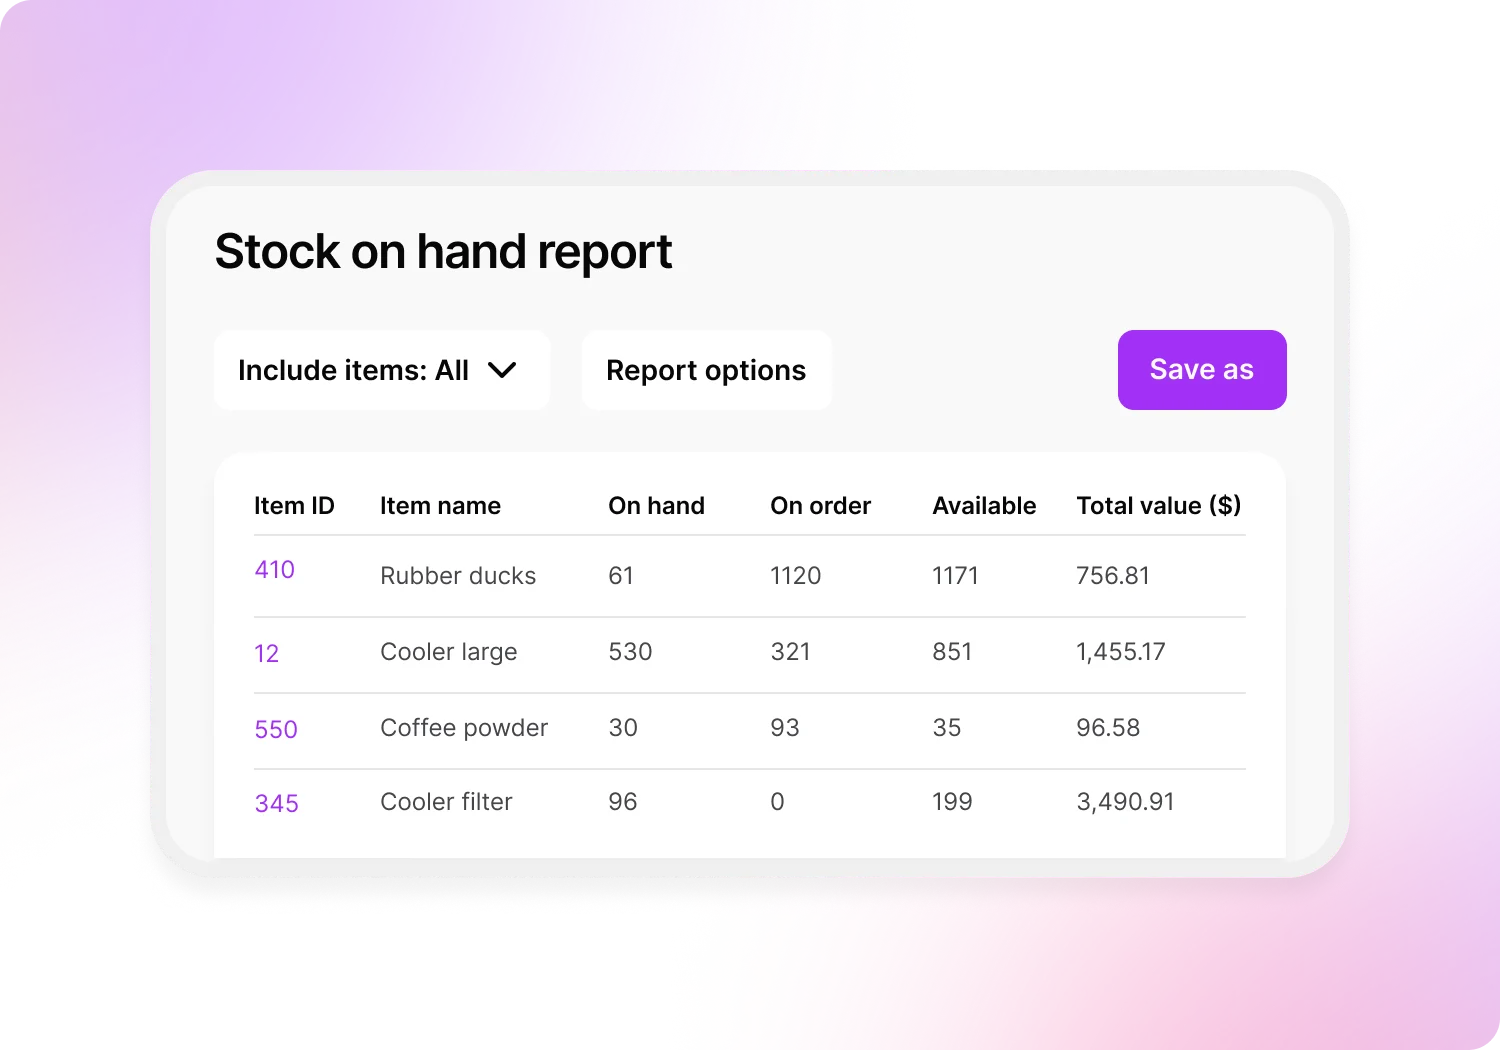 Stock on hand report shows an instant update of items, including quantities of stock on hand, on order and available, and it shows the total value of the stock.